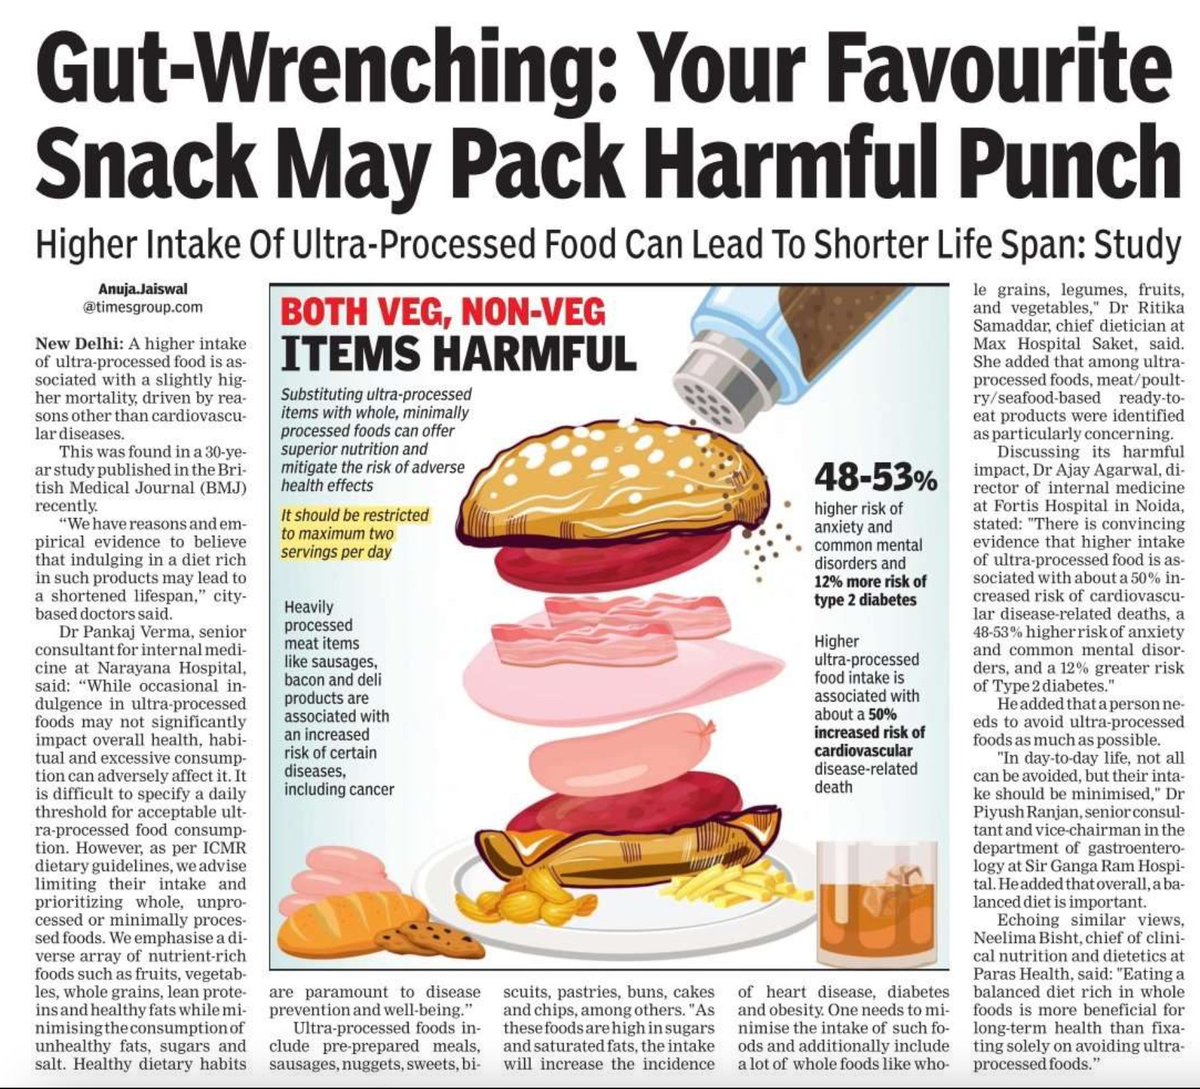 Anuja Jaiswal of The Times of India writes: Your favourite snack may pack harmful punch. Courtesy: @timesofindia